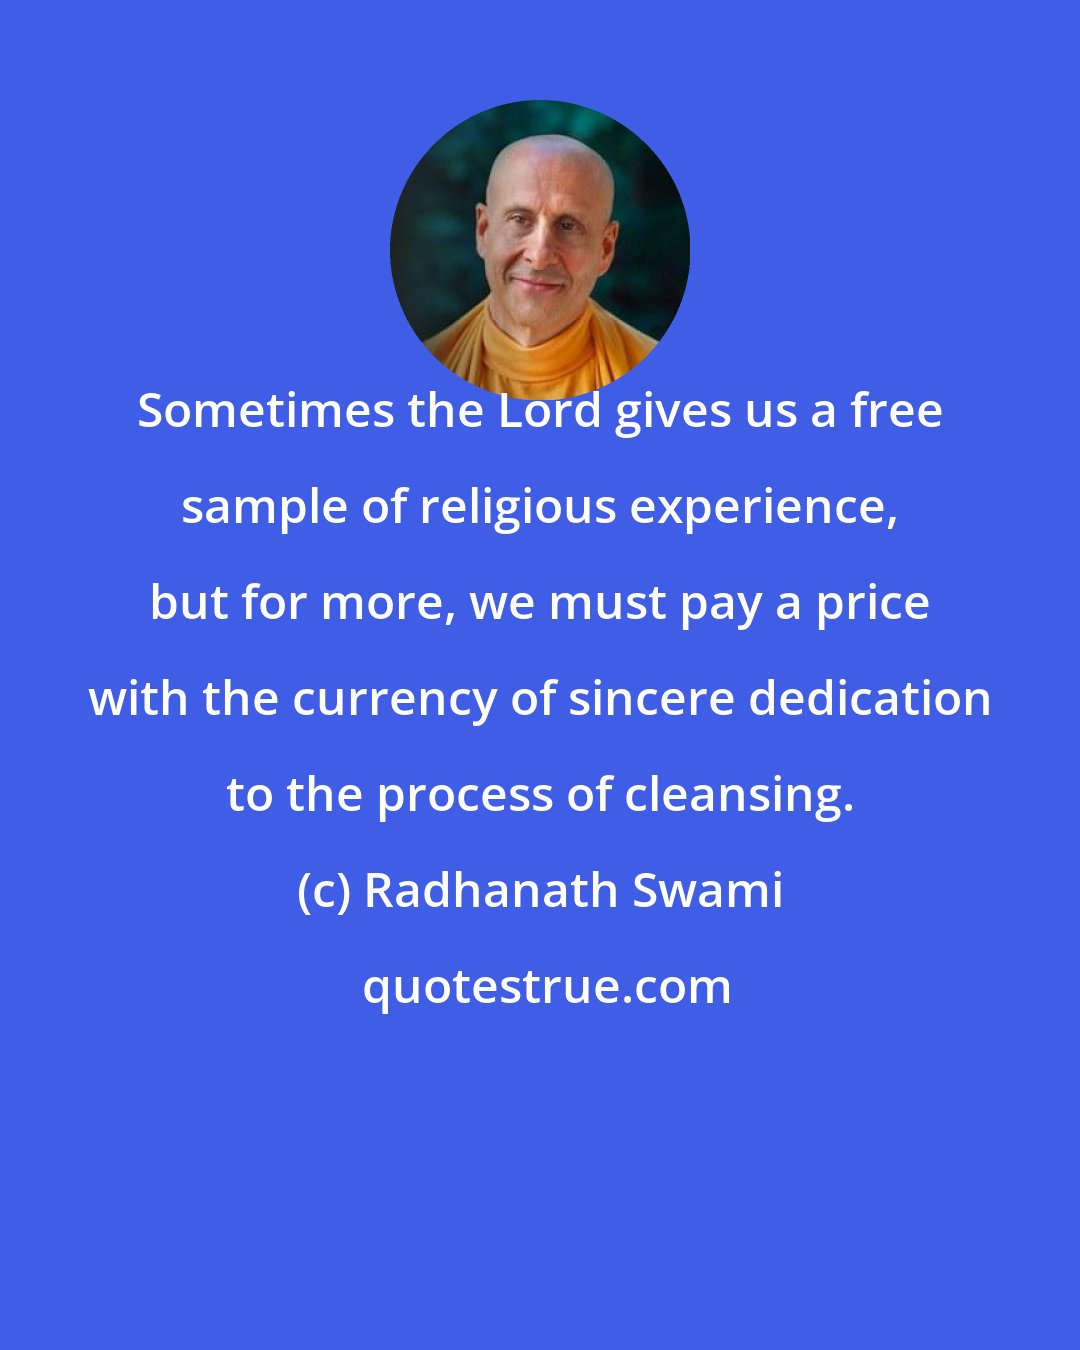 Radhanath Swami: Sometimes the Lord gives us a free sample of religious experience, but for more, we must pay a price with the currency of sincere dedication to the process of cleansing.